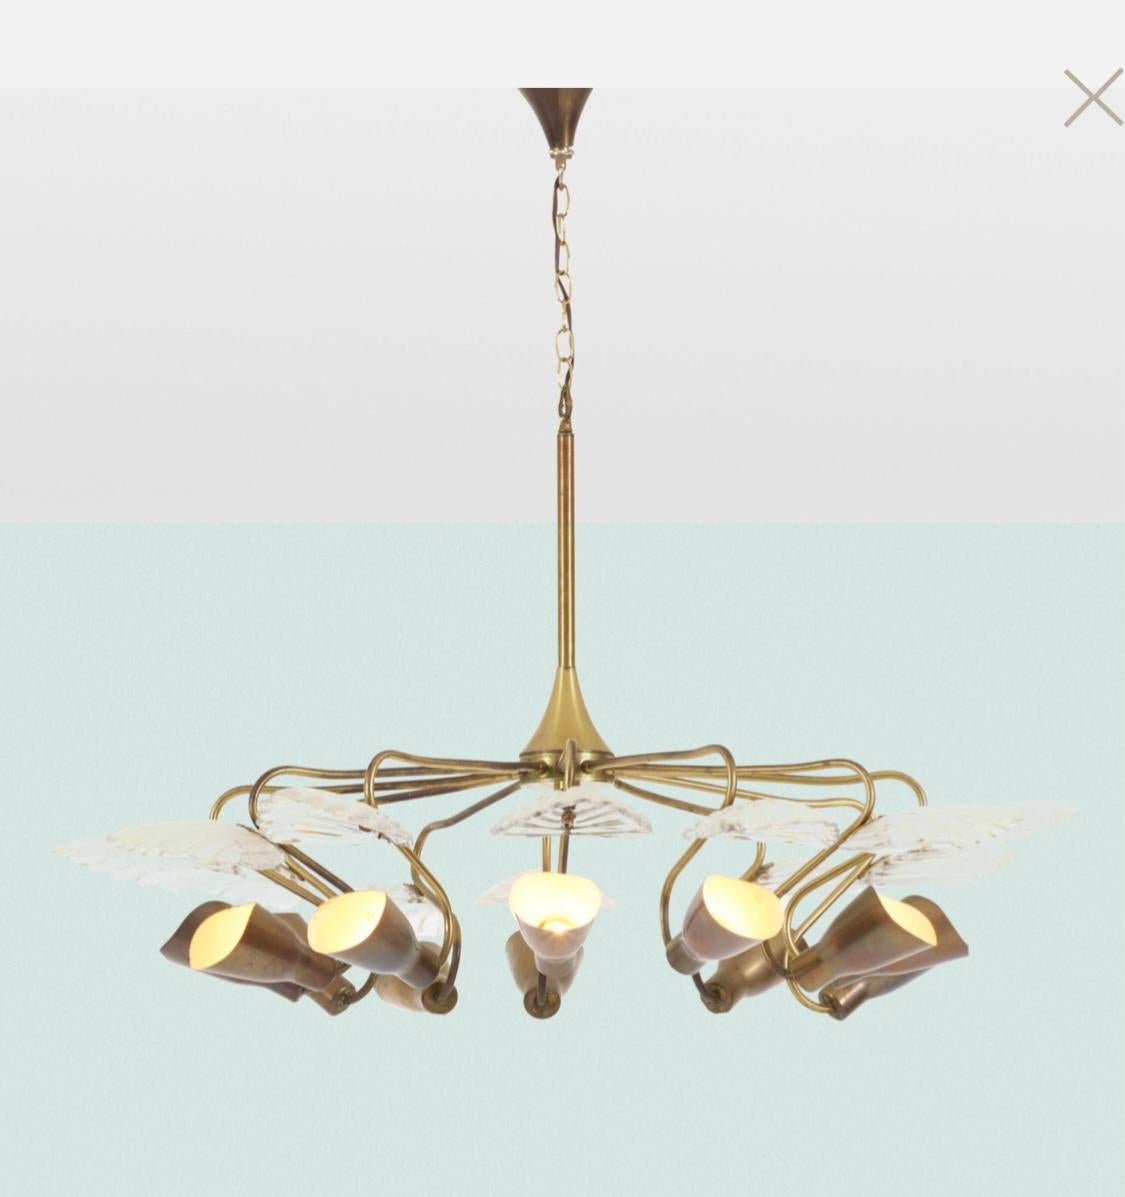 Mid-Century Modern Classic Orrefors Brass and Glass Chandelier , Duquesne Club, Sweden /Finland 